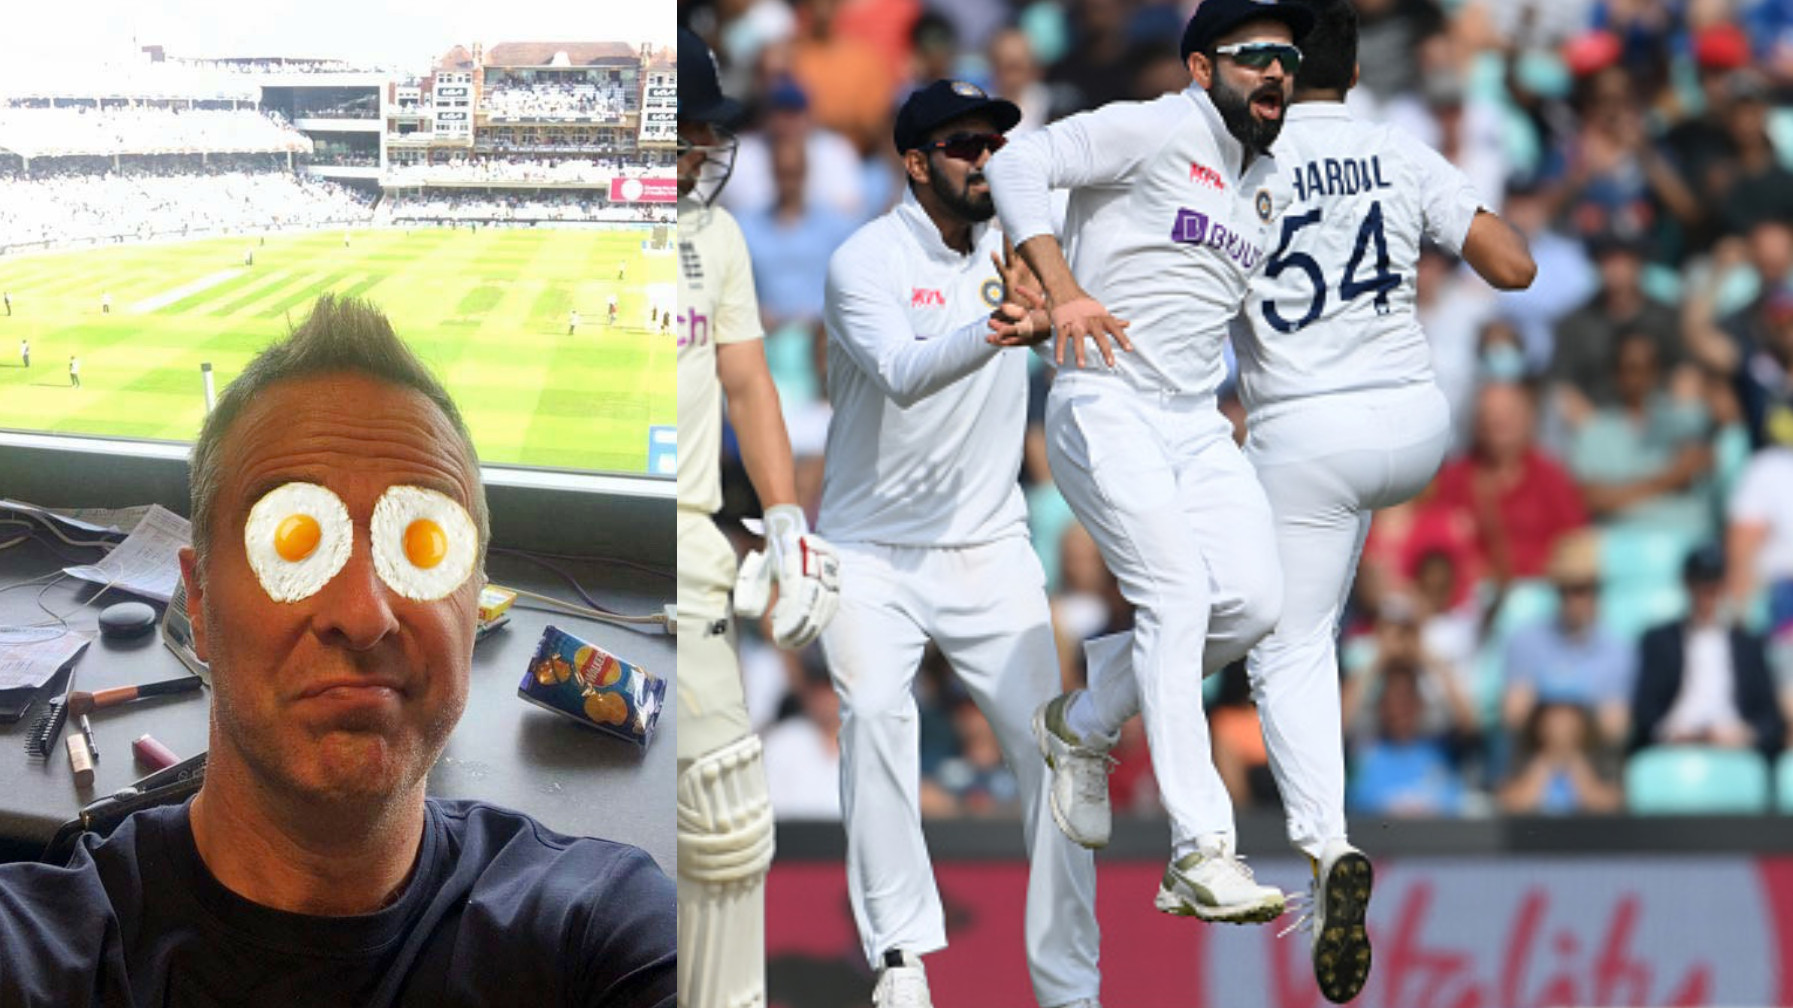 ENG v IND 2021: Michael Vaughan posts an egg on face photo after India wins at Oval by 157 runs